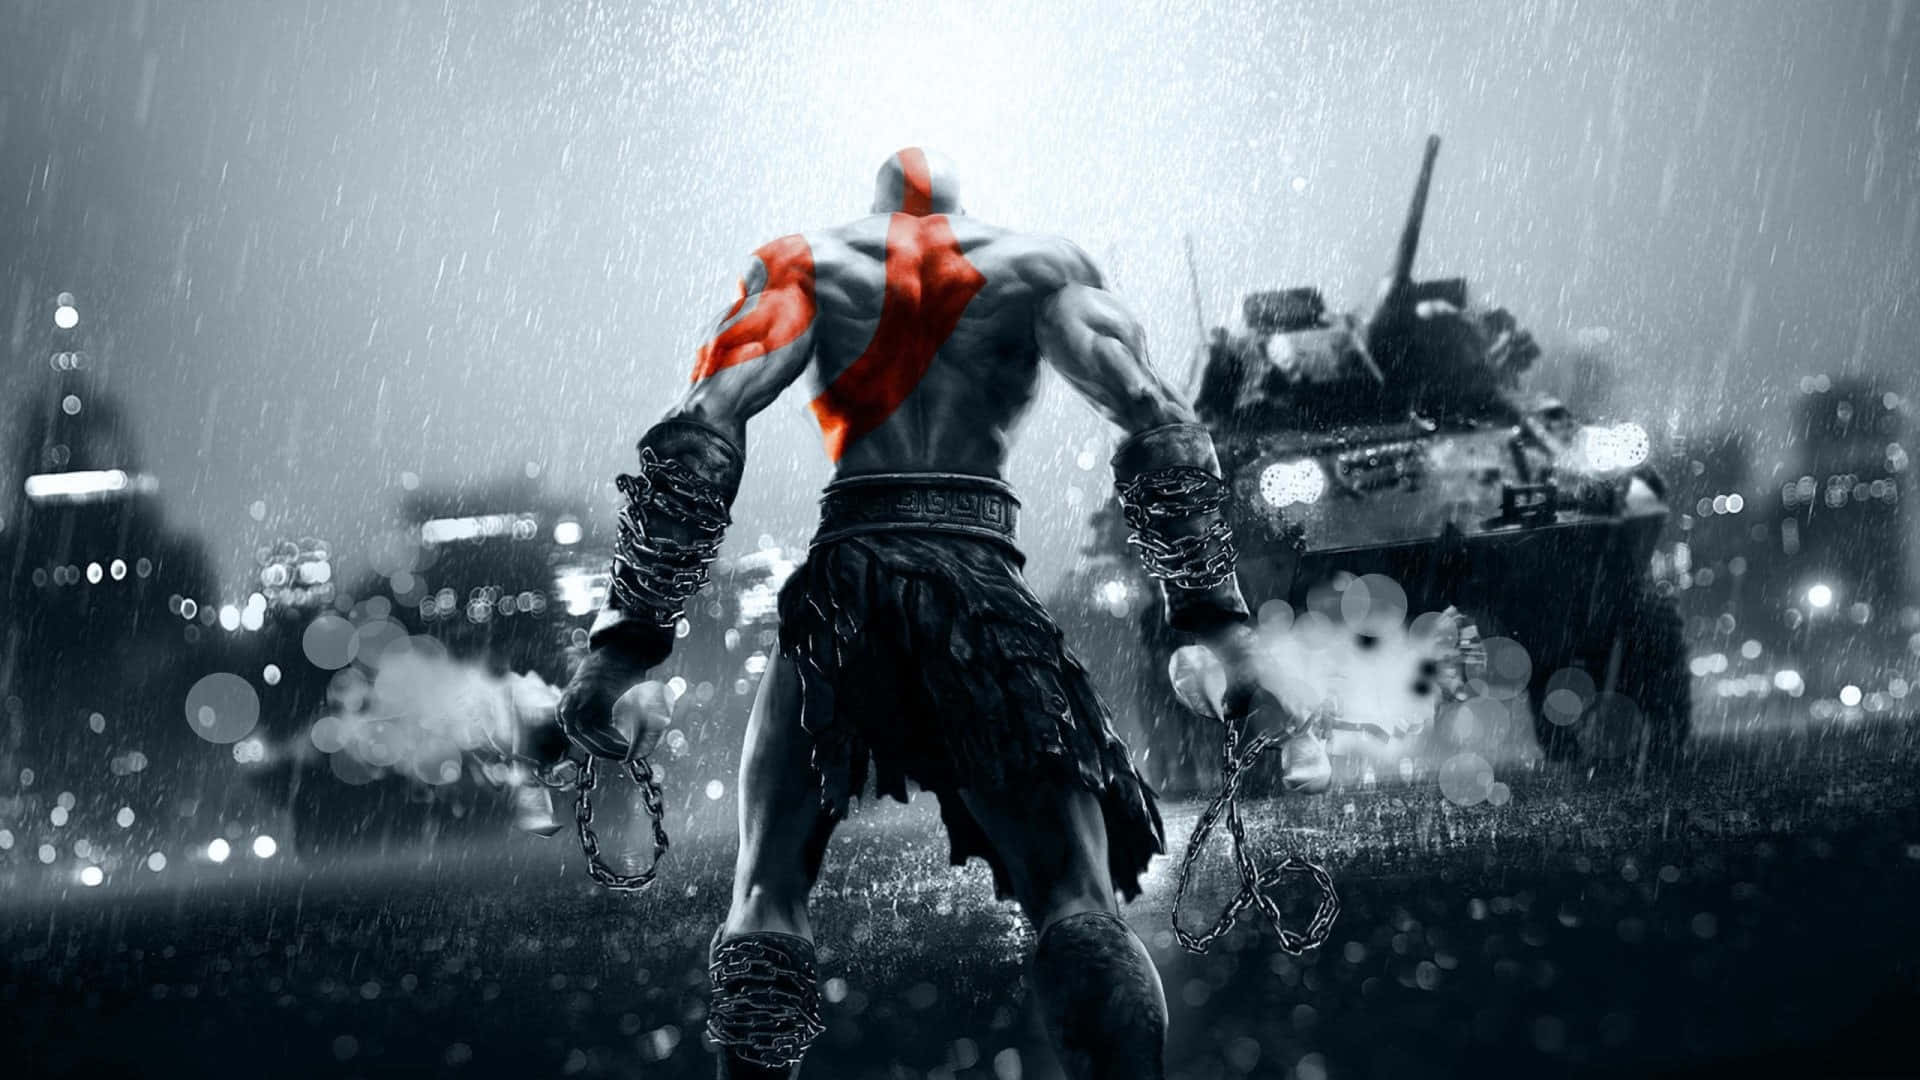 Kratos and Atreus in a gripping God Of War action scene